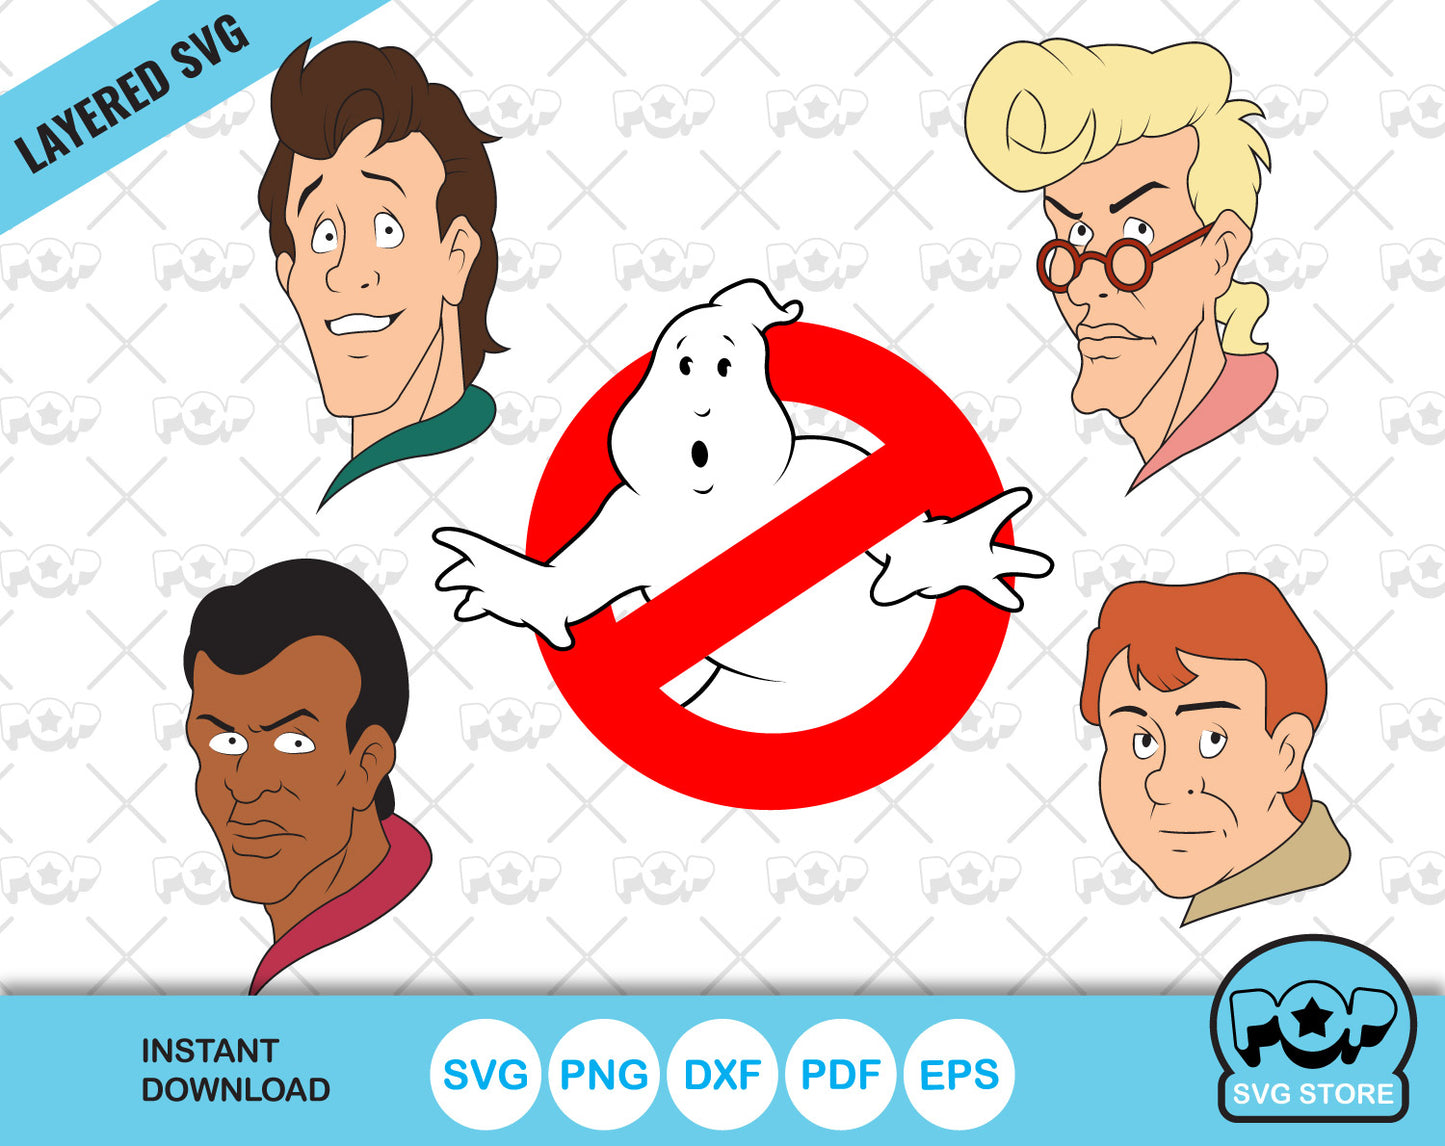 Ghostbusters clipart bundle, The Real Ghostbusters SVG cut files for cricut silhouette, SVG, PNG, DXF, instant download